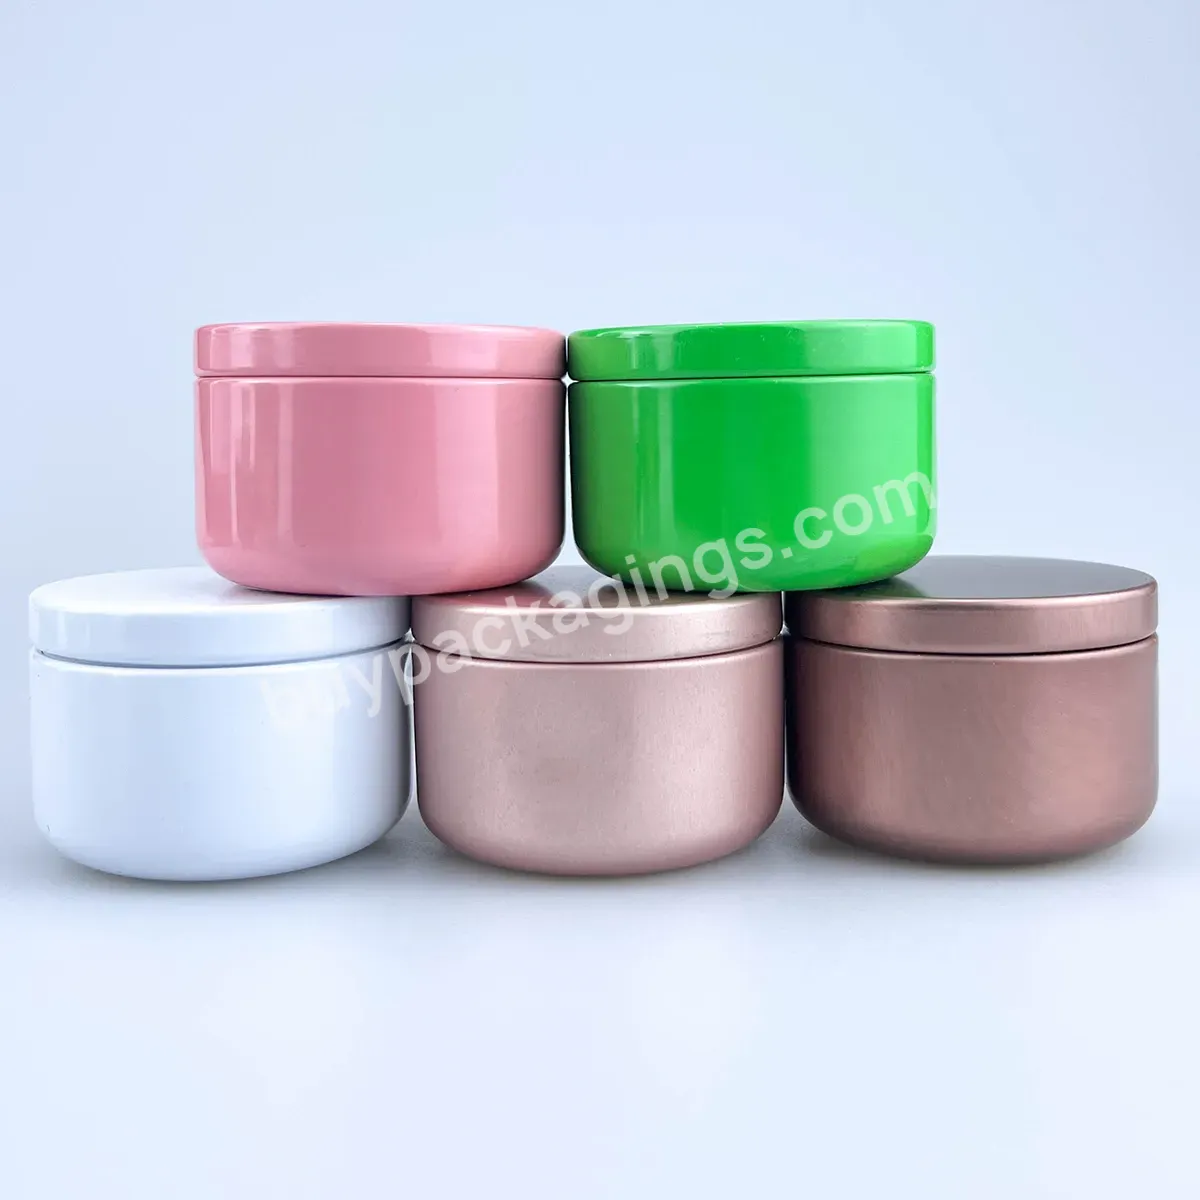 Oem Eco-friendly Recycle 1.6oz Customized Emboss Labeling Cmyk Printing Round Shape Metal Cans For Food Packing - Buy New Design Custom Printing Candle Tea Aluminum Tin Box With Screw Lids And Windows,Chinese Manufacturer Directly Airtight Aluminum T